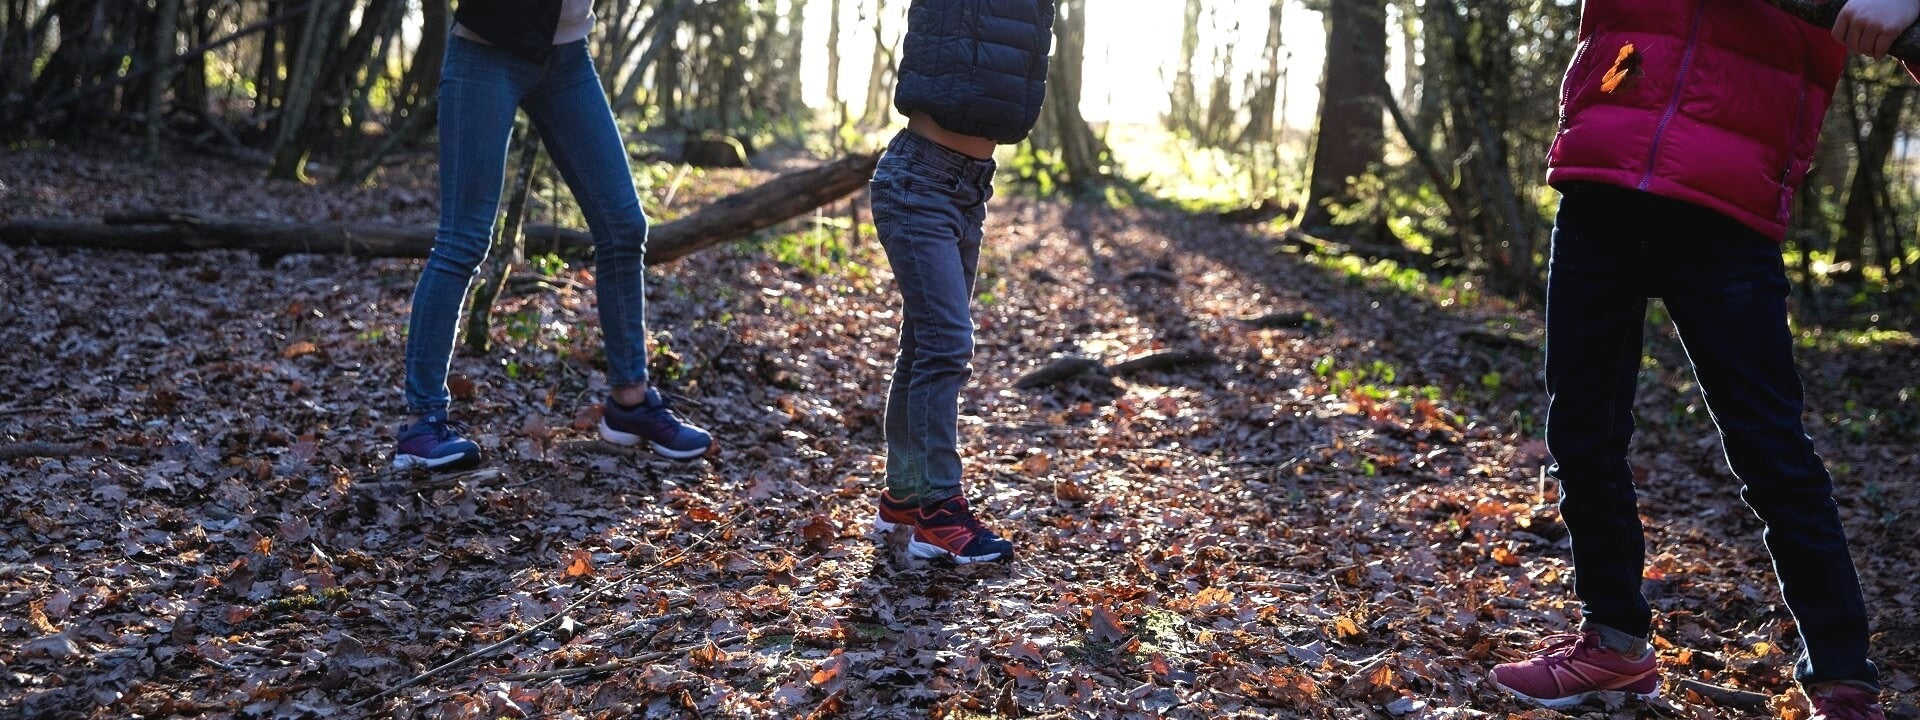 HOW TO CHOOSE HIKING SHOES FOR KIDS